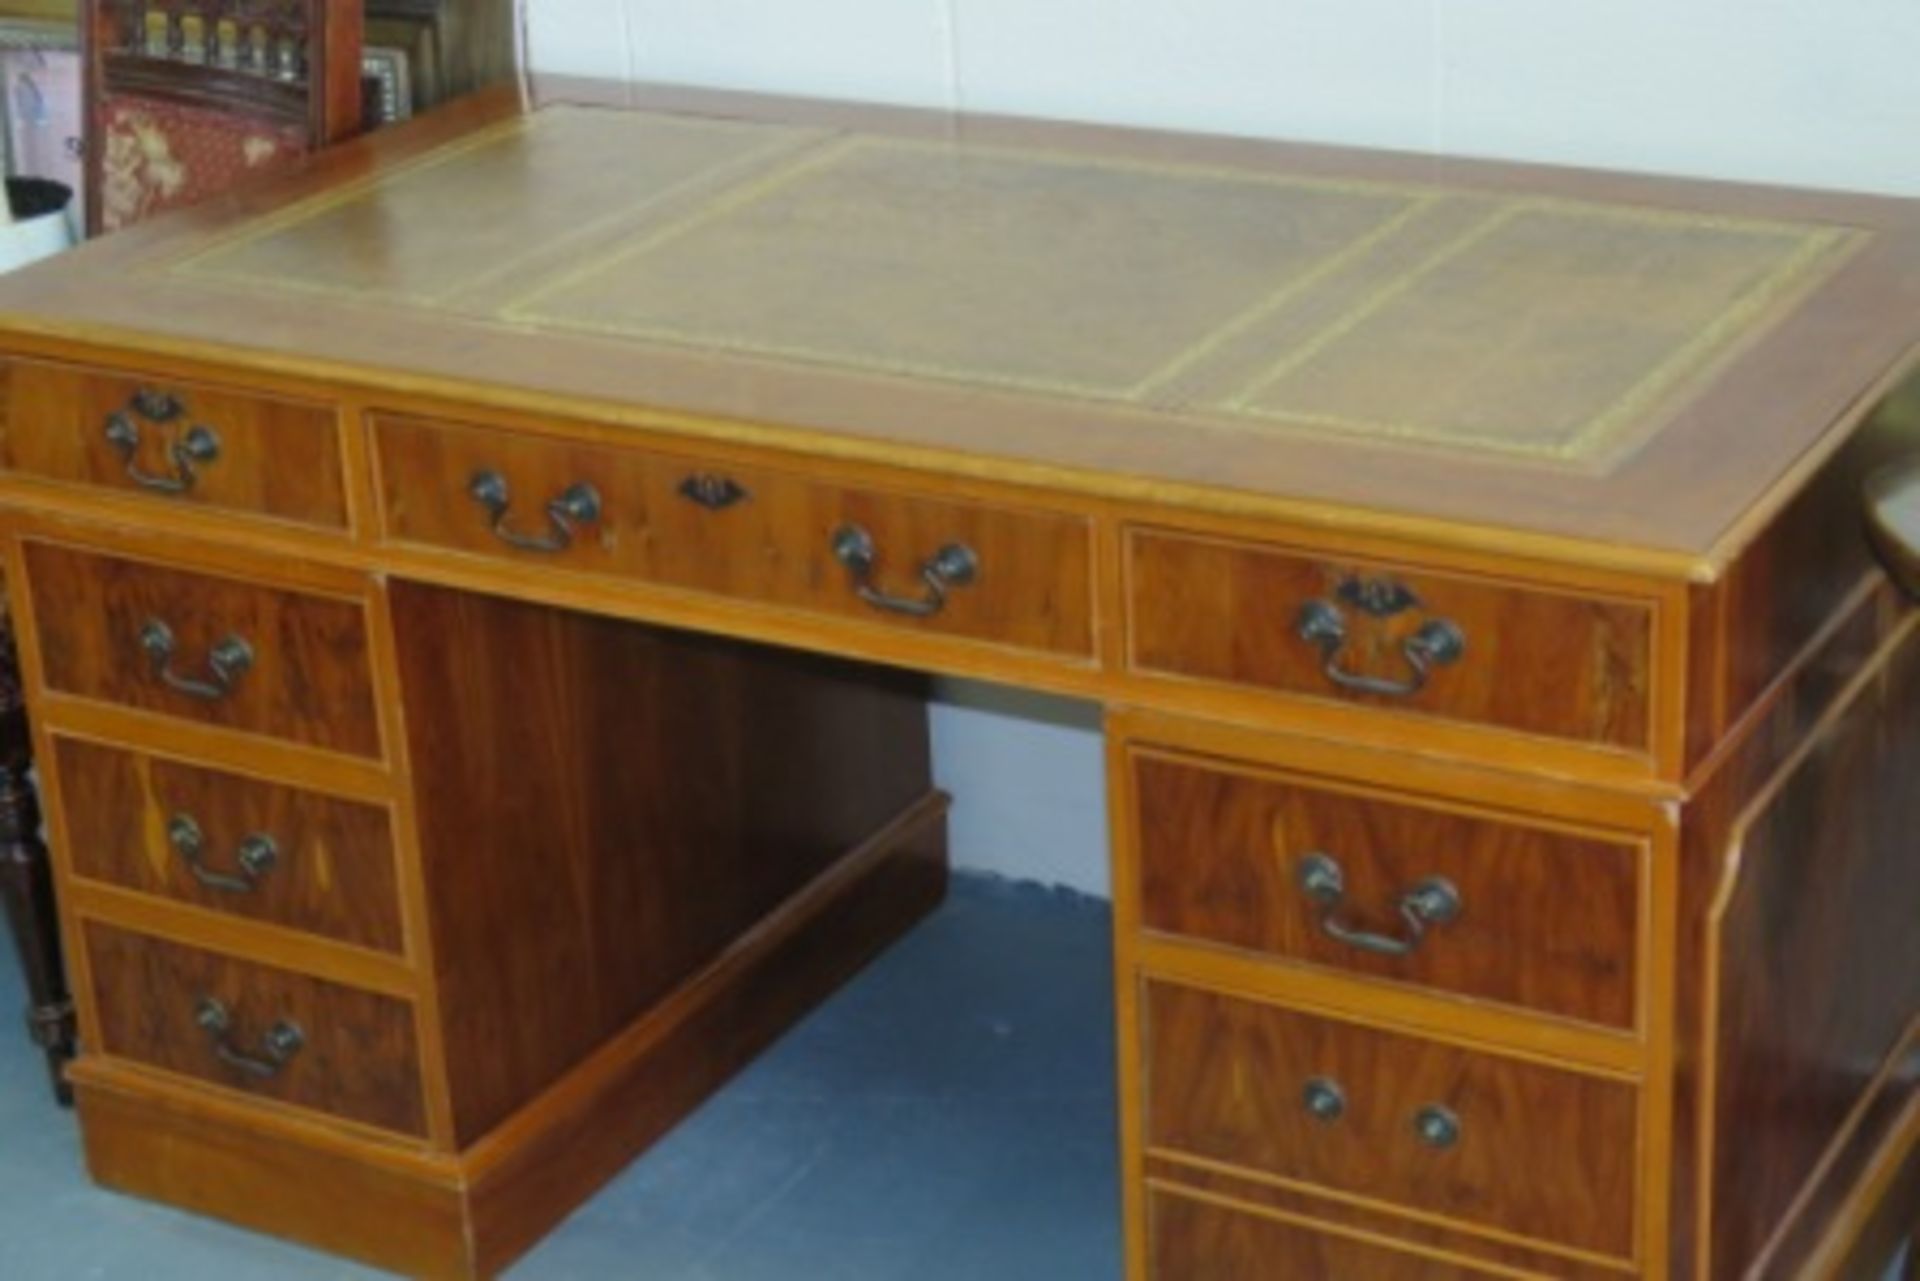 Vintage Leather Inlaid Desk With 7 Drawers - Image 2 of 3